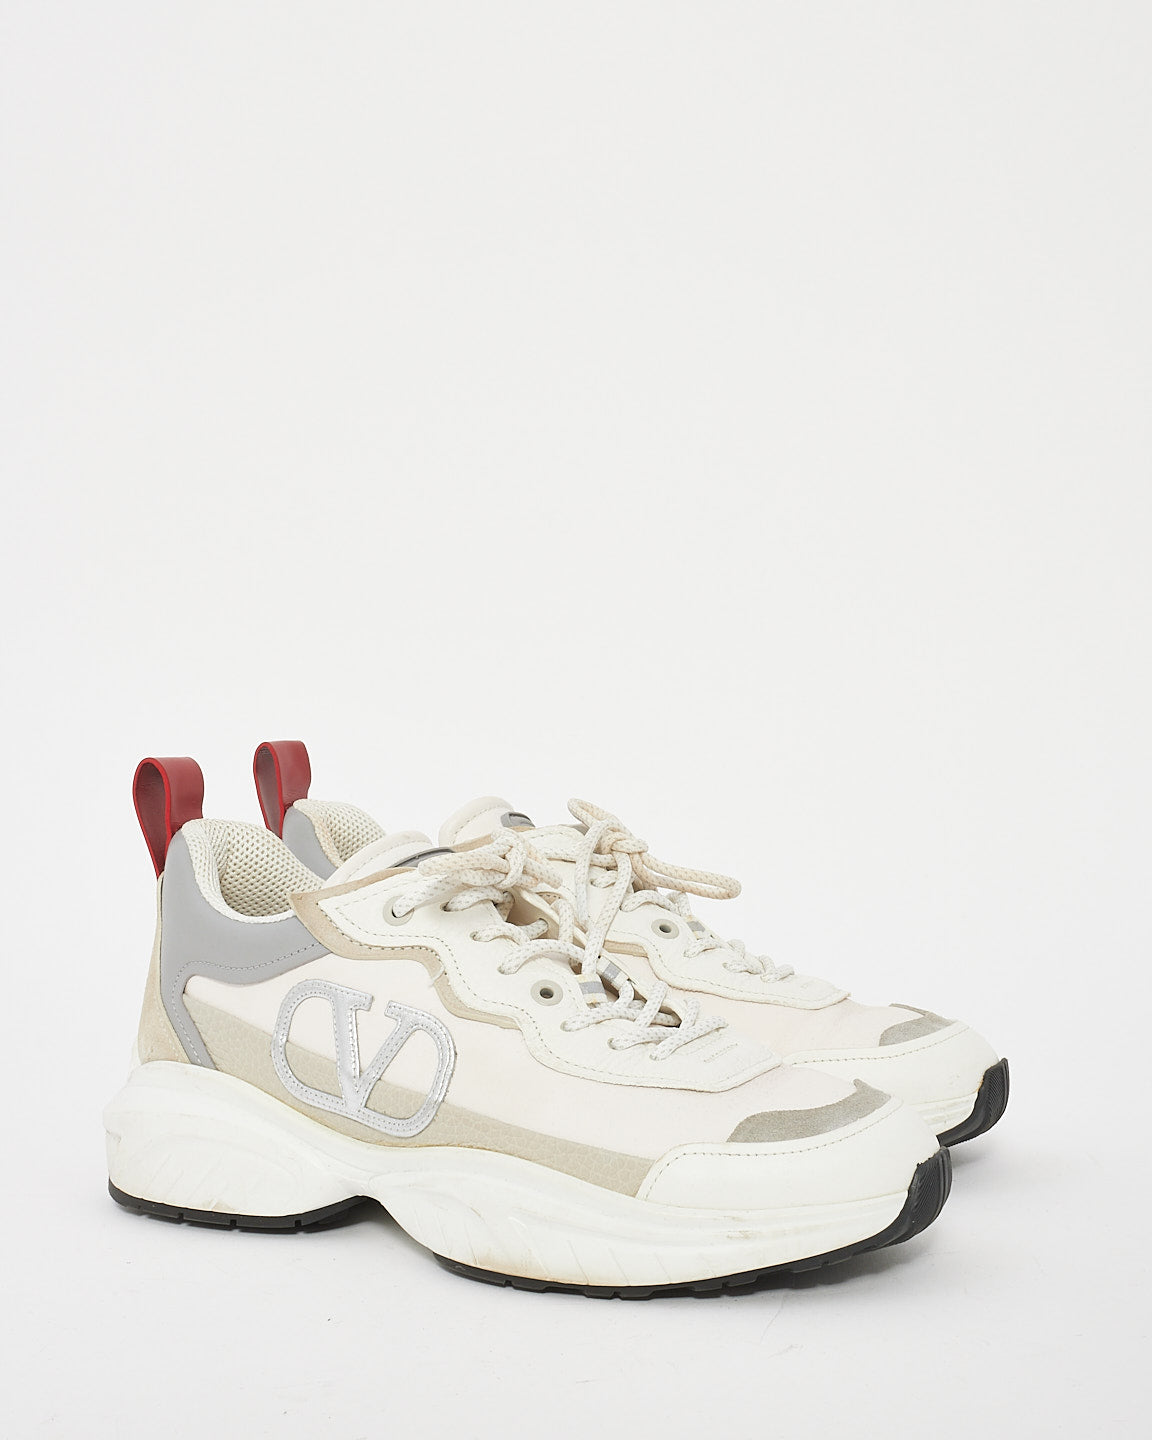 Valentino White Leather Bounce Sneakers - 38.5